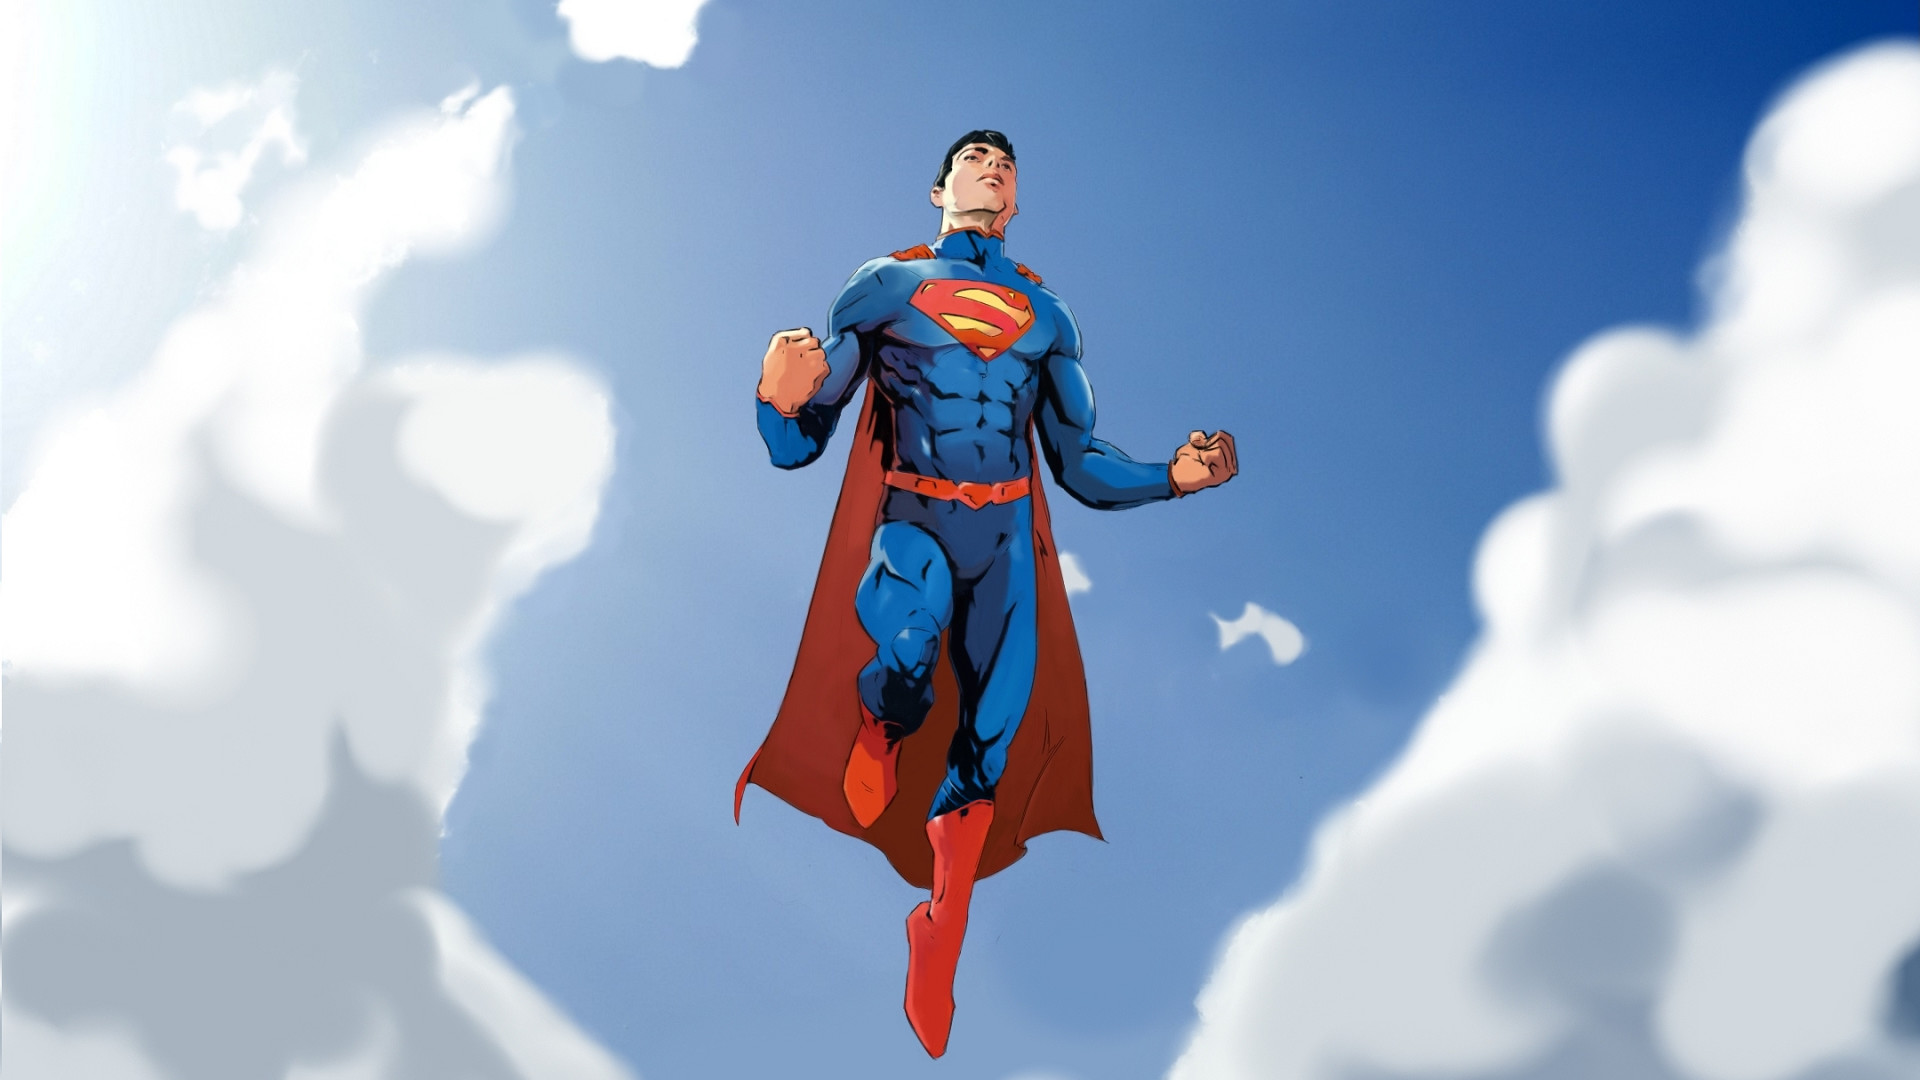 1920x1080 HD Superman wallpaper for free download.